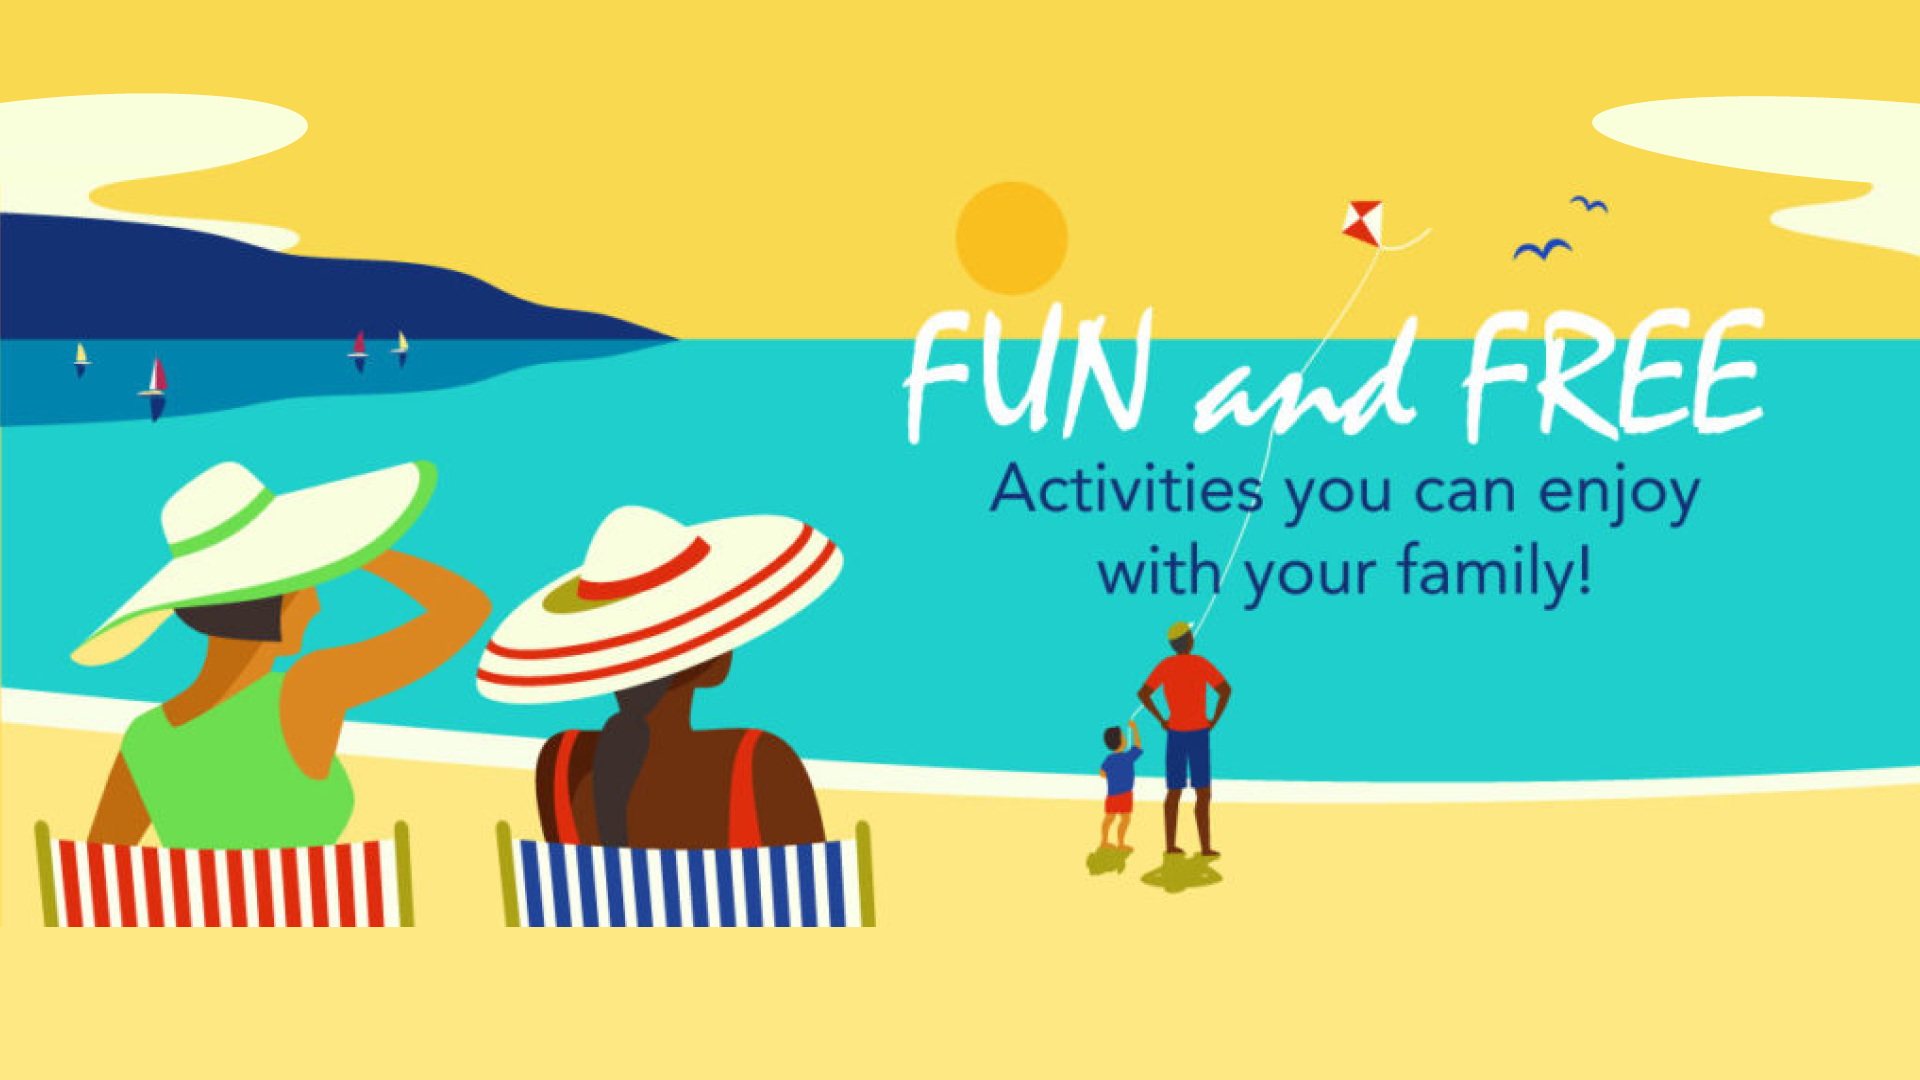 Fun and free activities you can enjoy with your family!